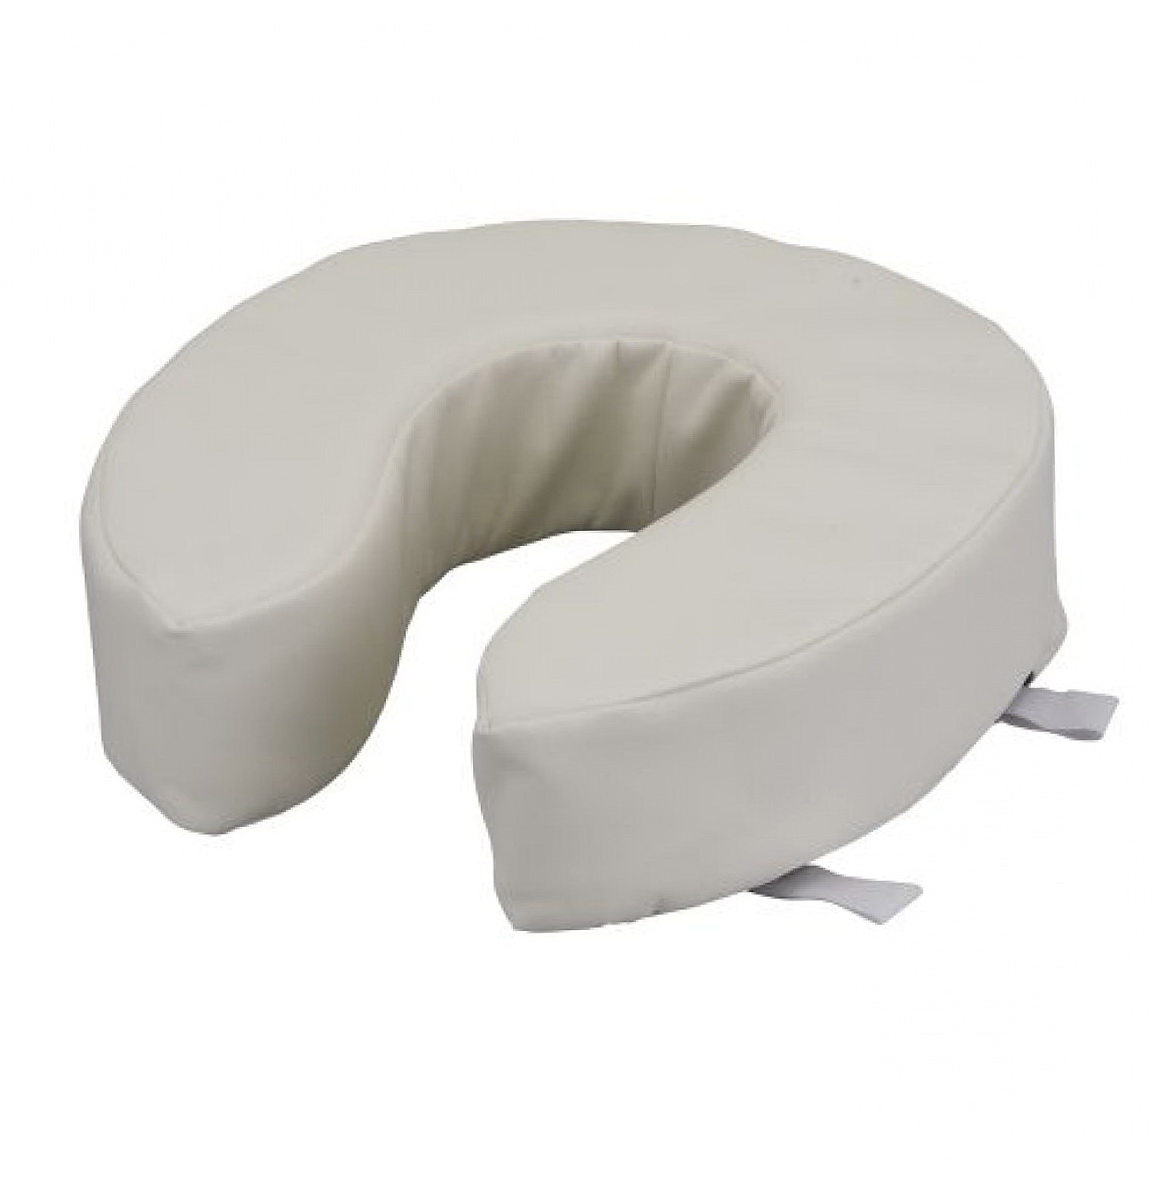 Cushioned toilet seat riser